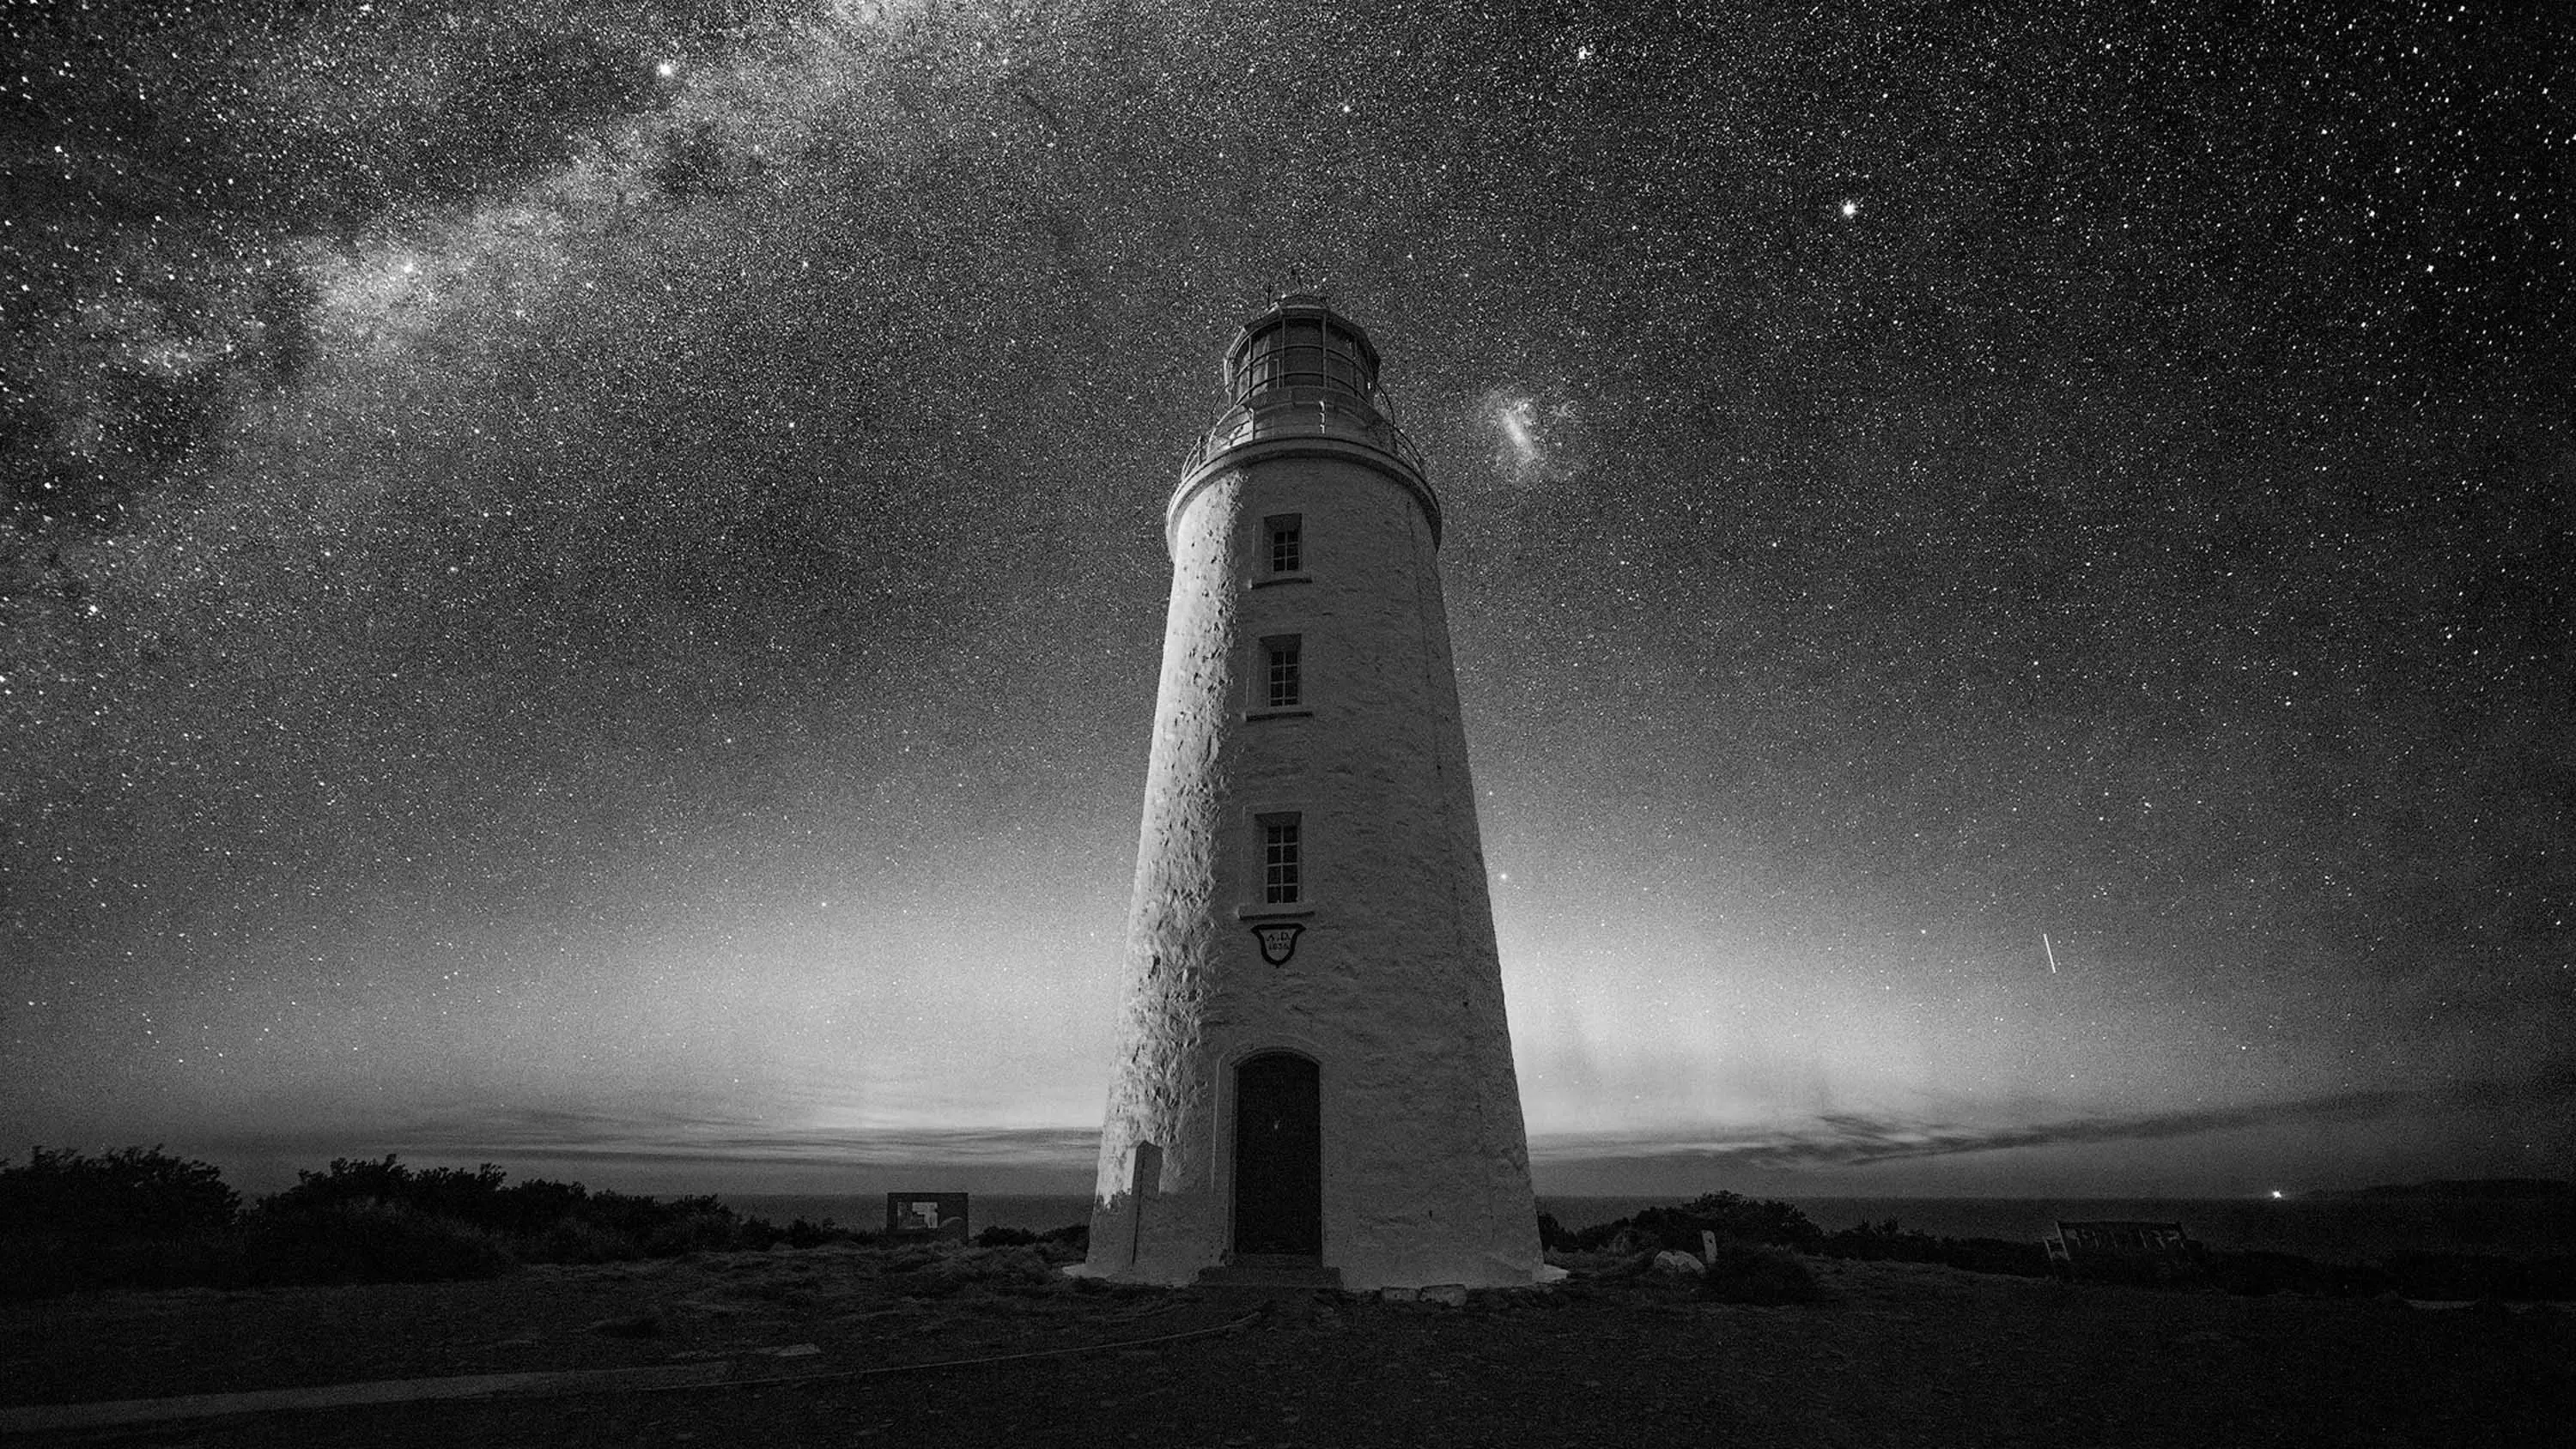 A lighthouse made of brick and painted white stands against the night sky, full of stars.